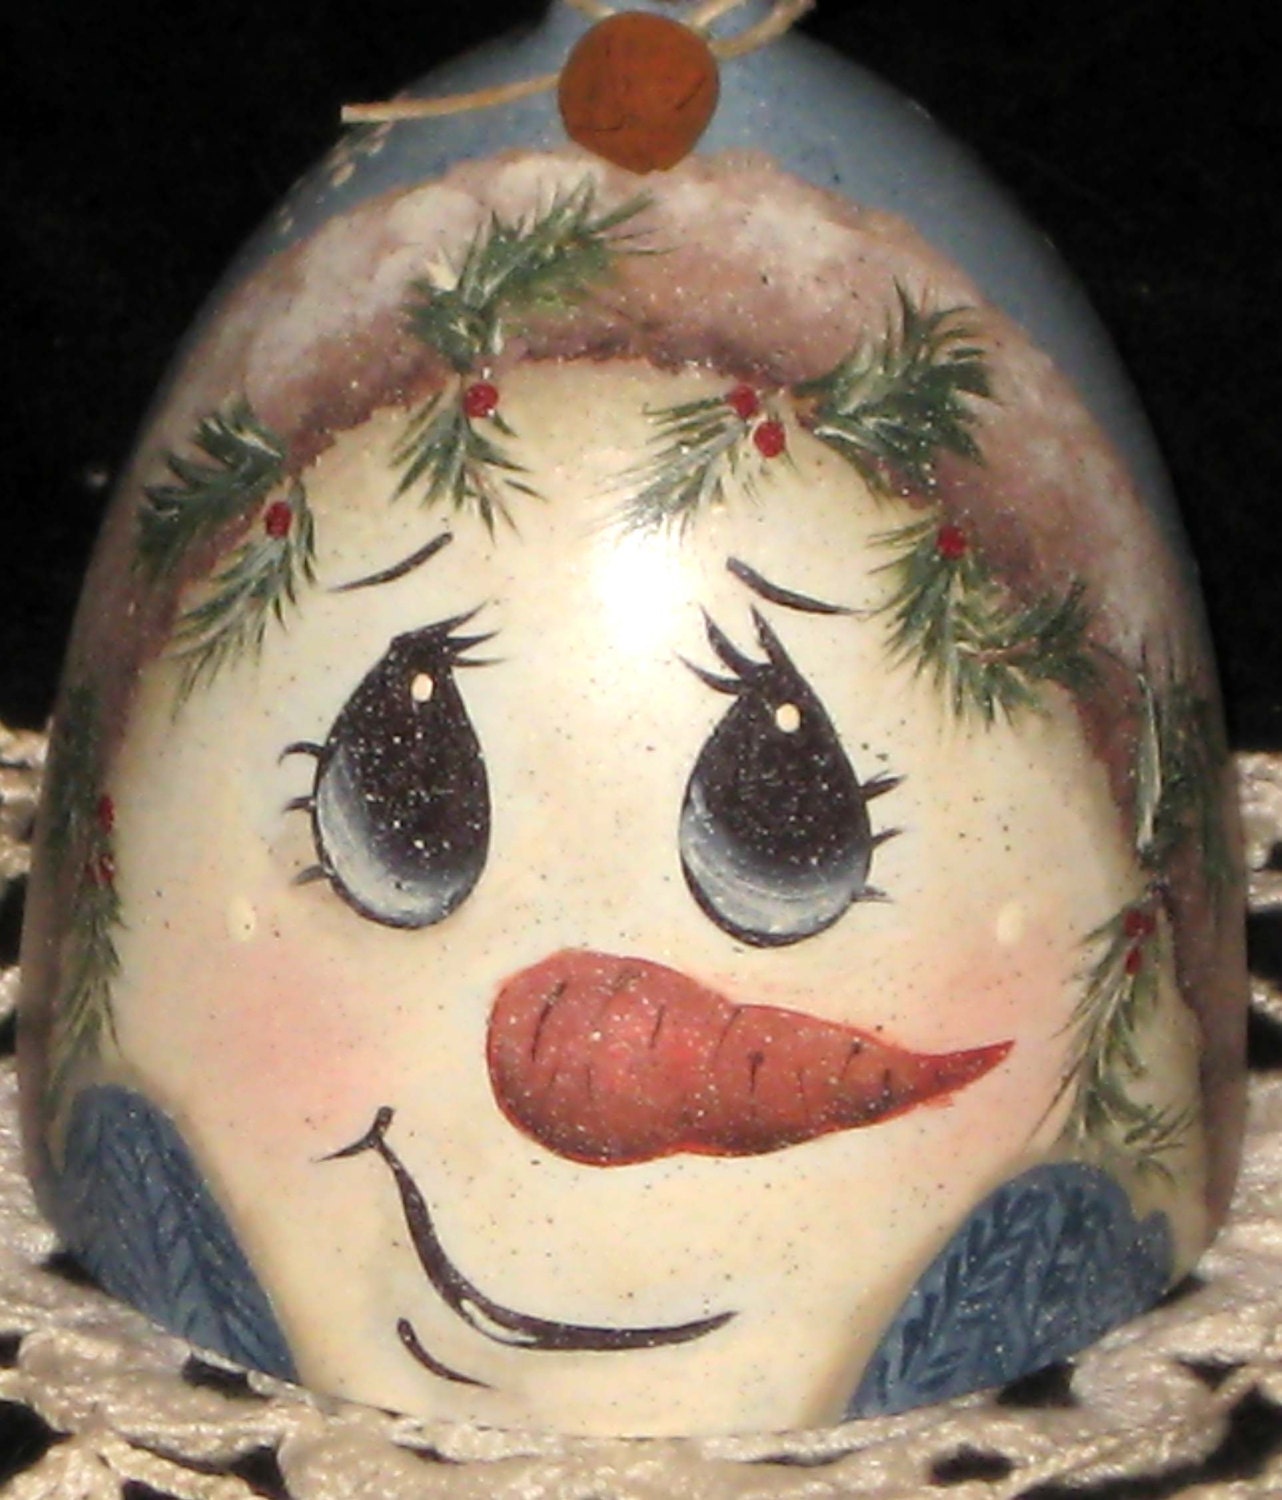 Handpainted vintage wine glass with snowman face candle